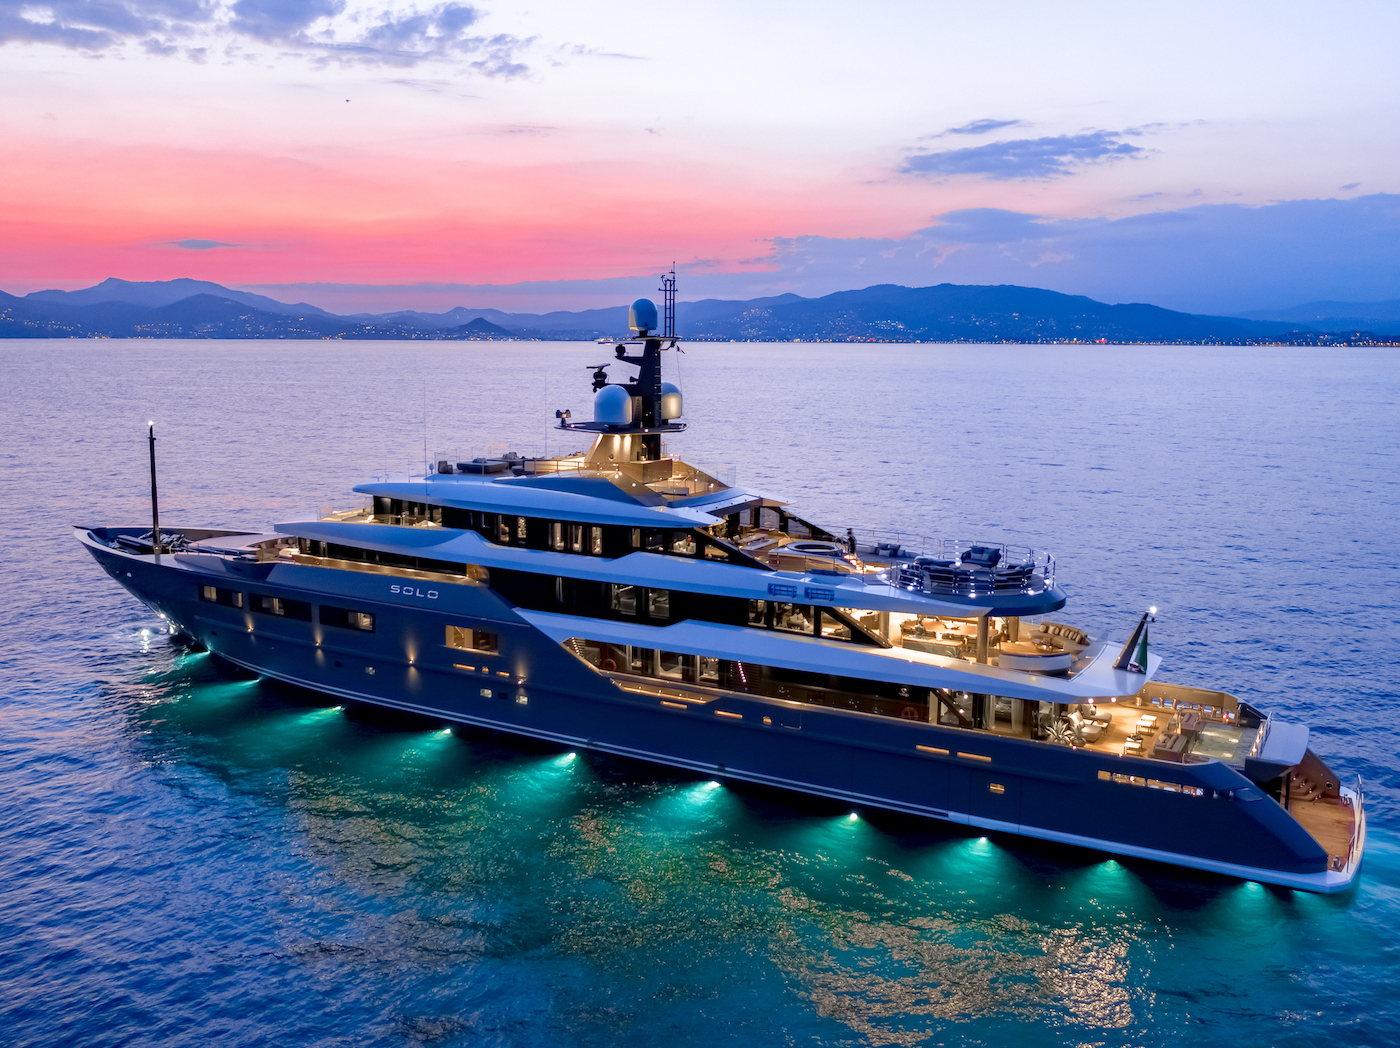 luxury yacht pictures